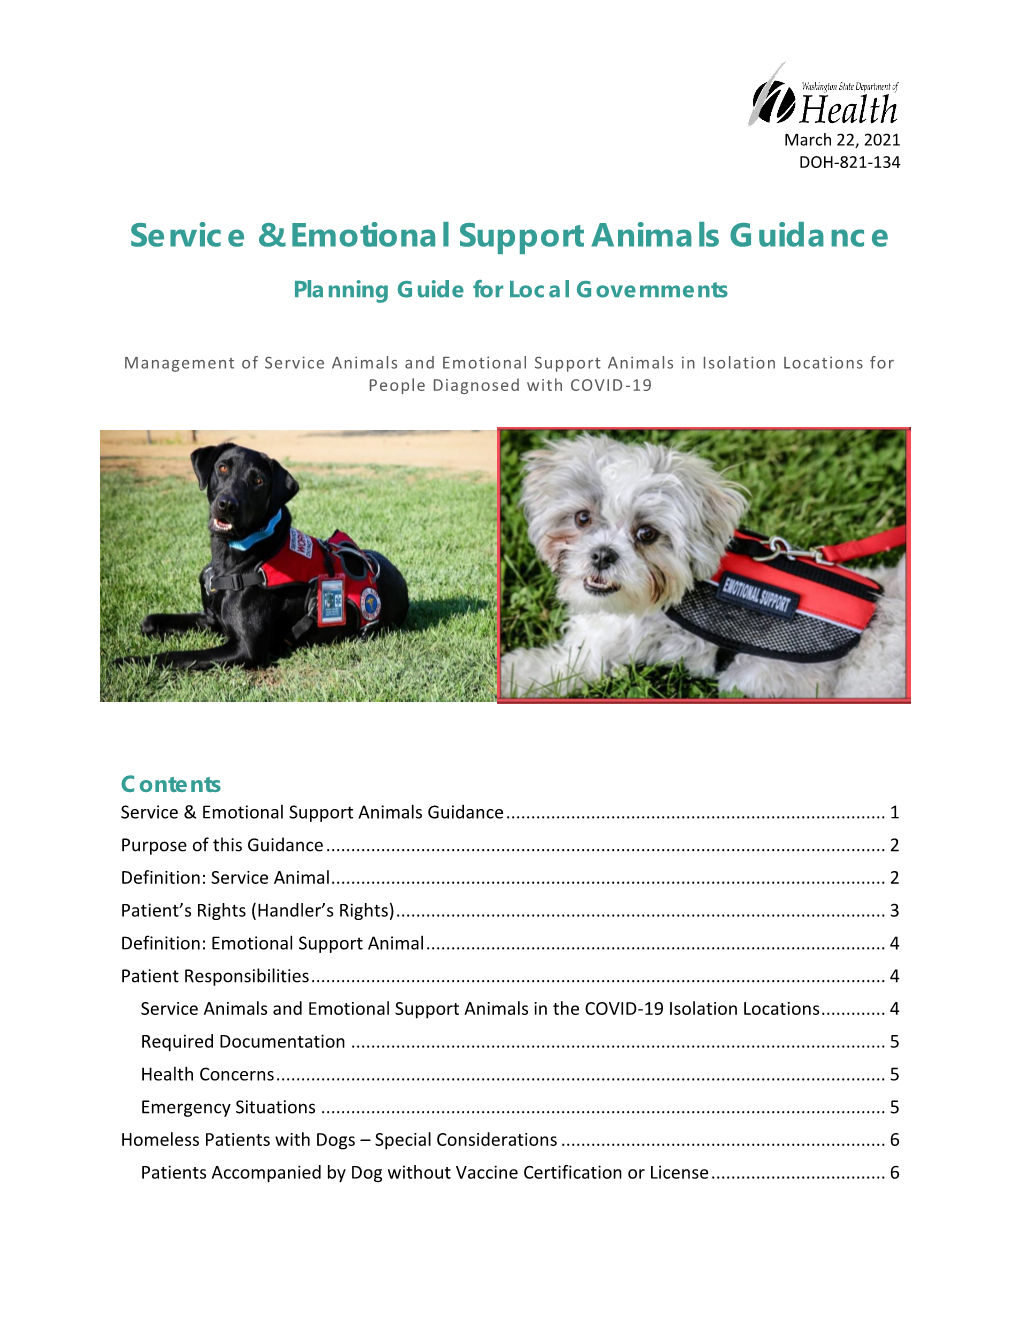 Service & Emotional Support Animals Guidance